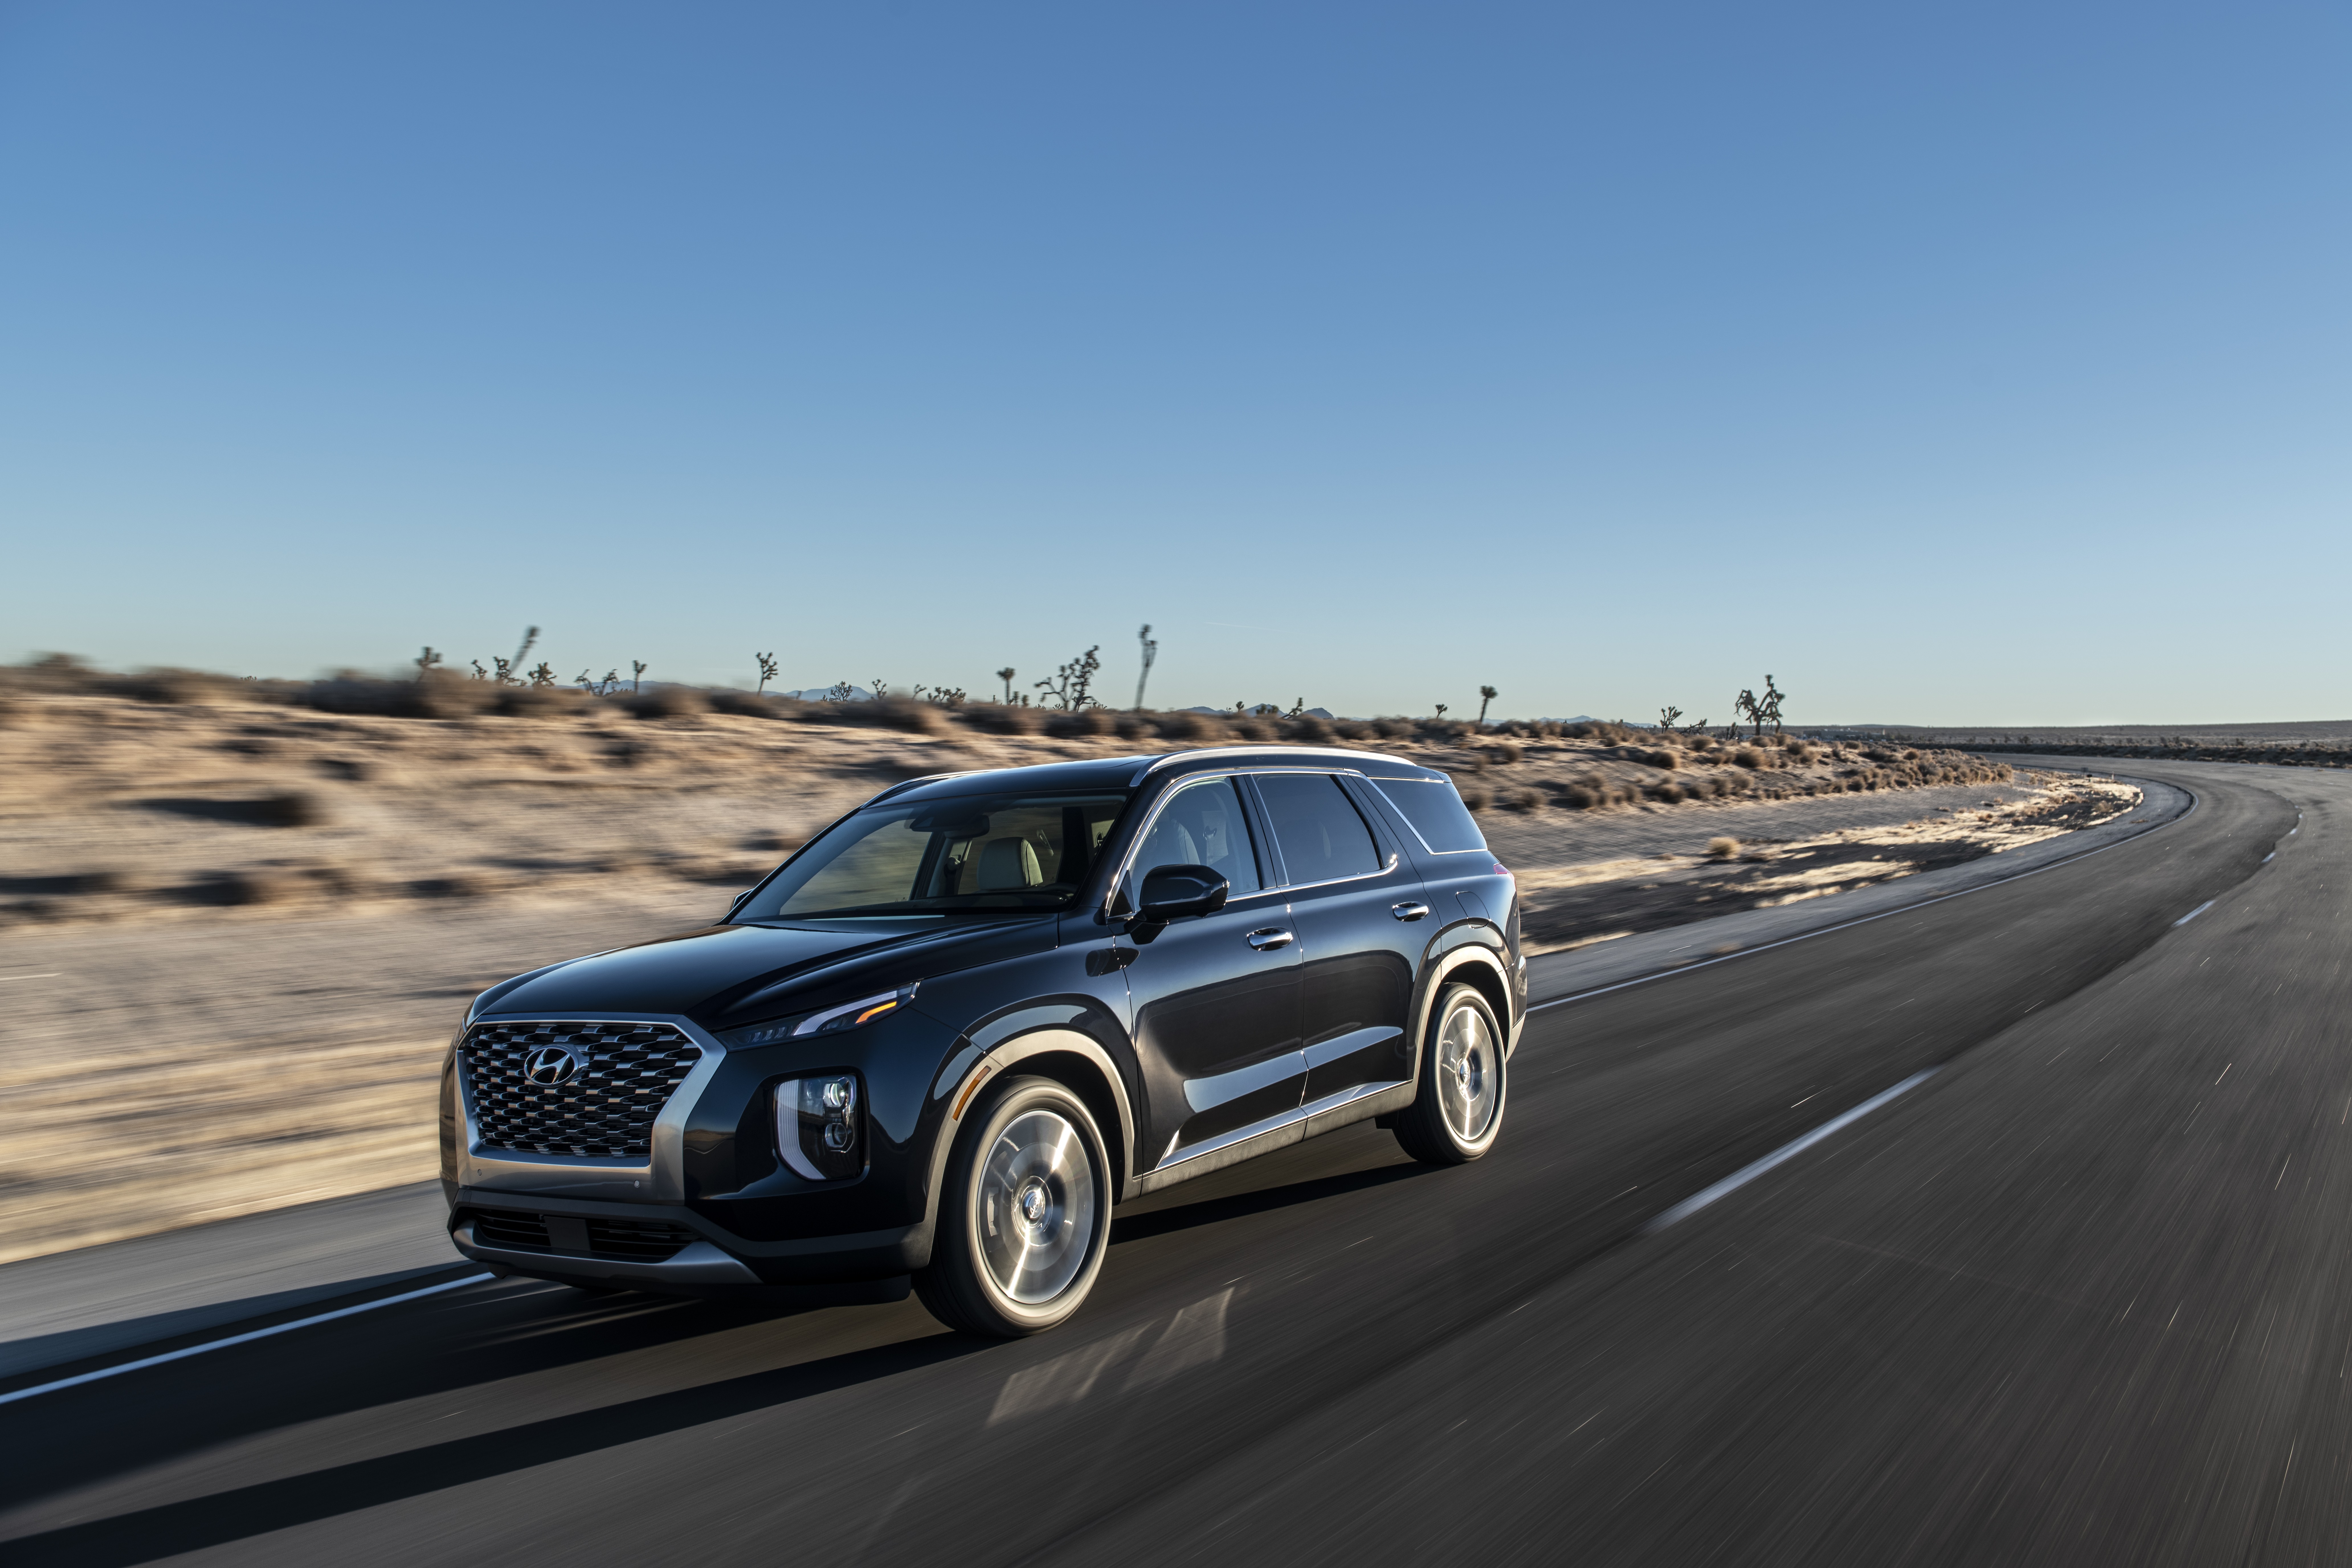 Hyundai Palisade accessories specifications